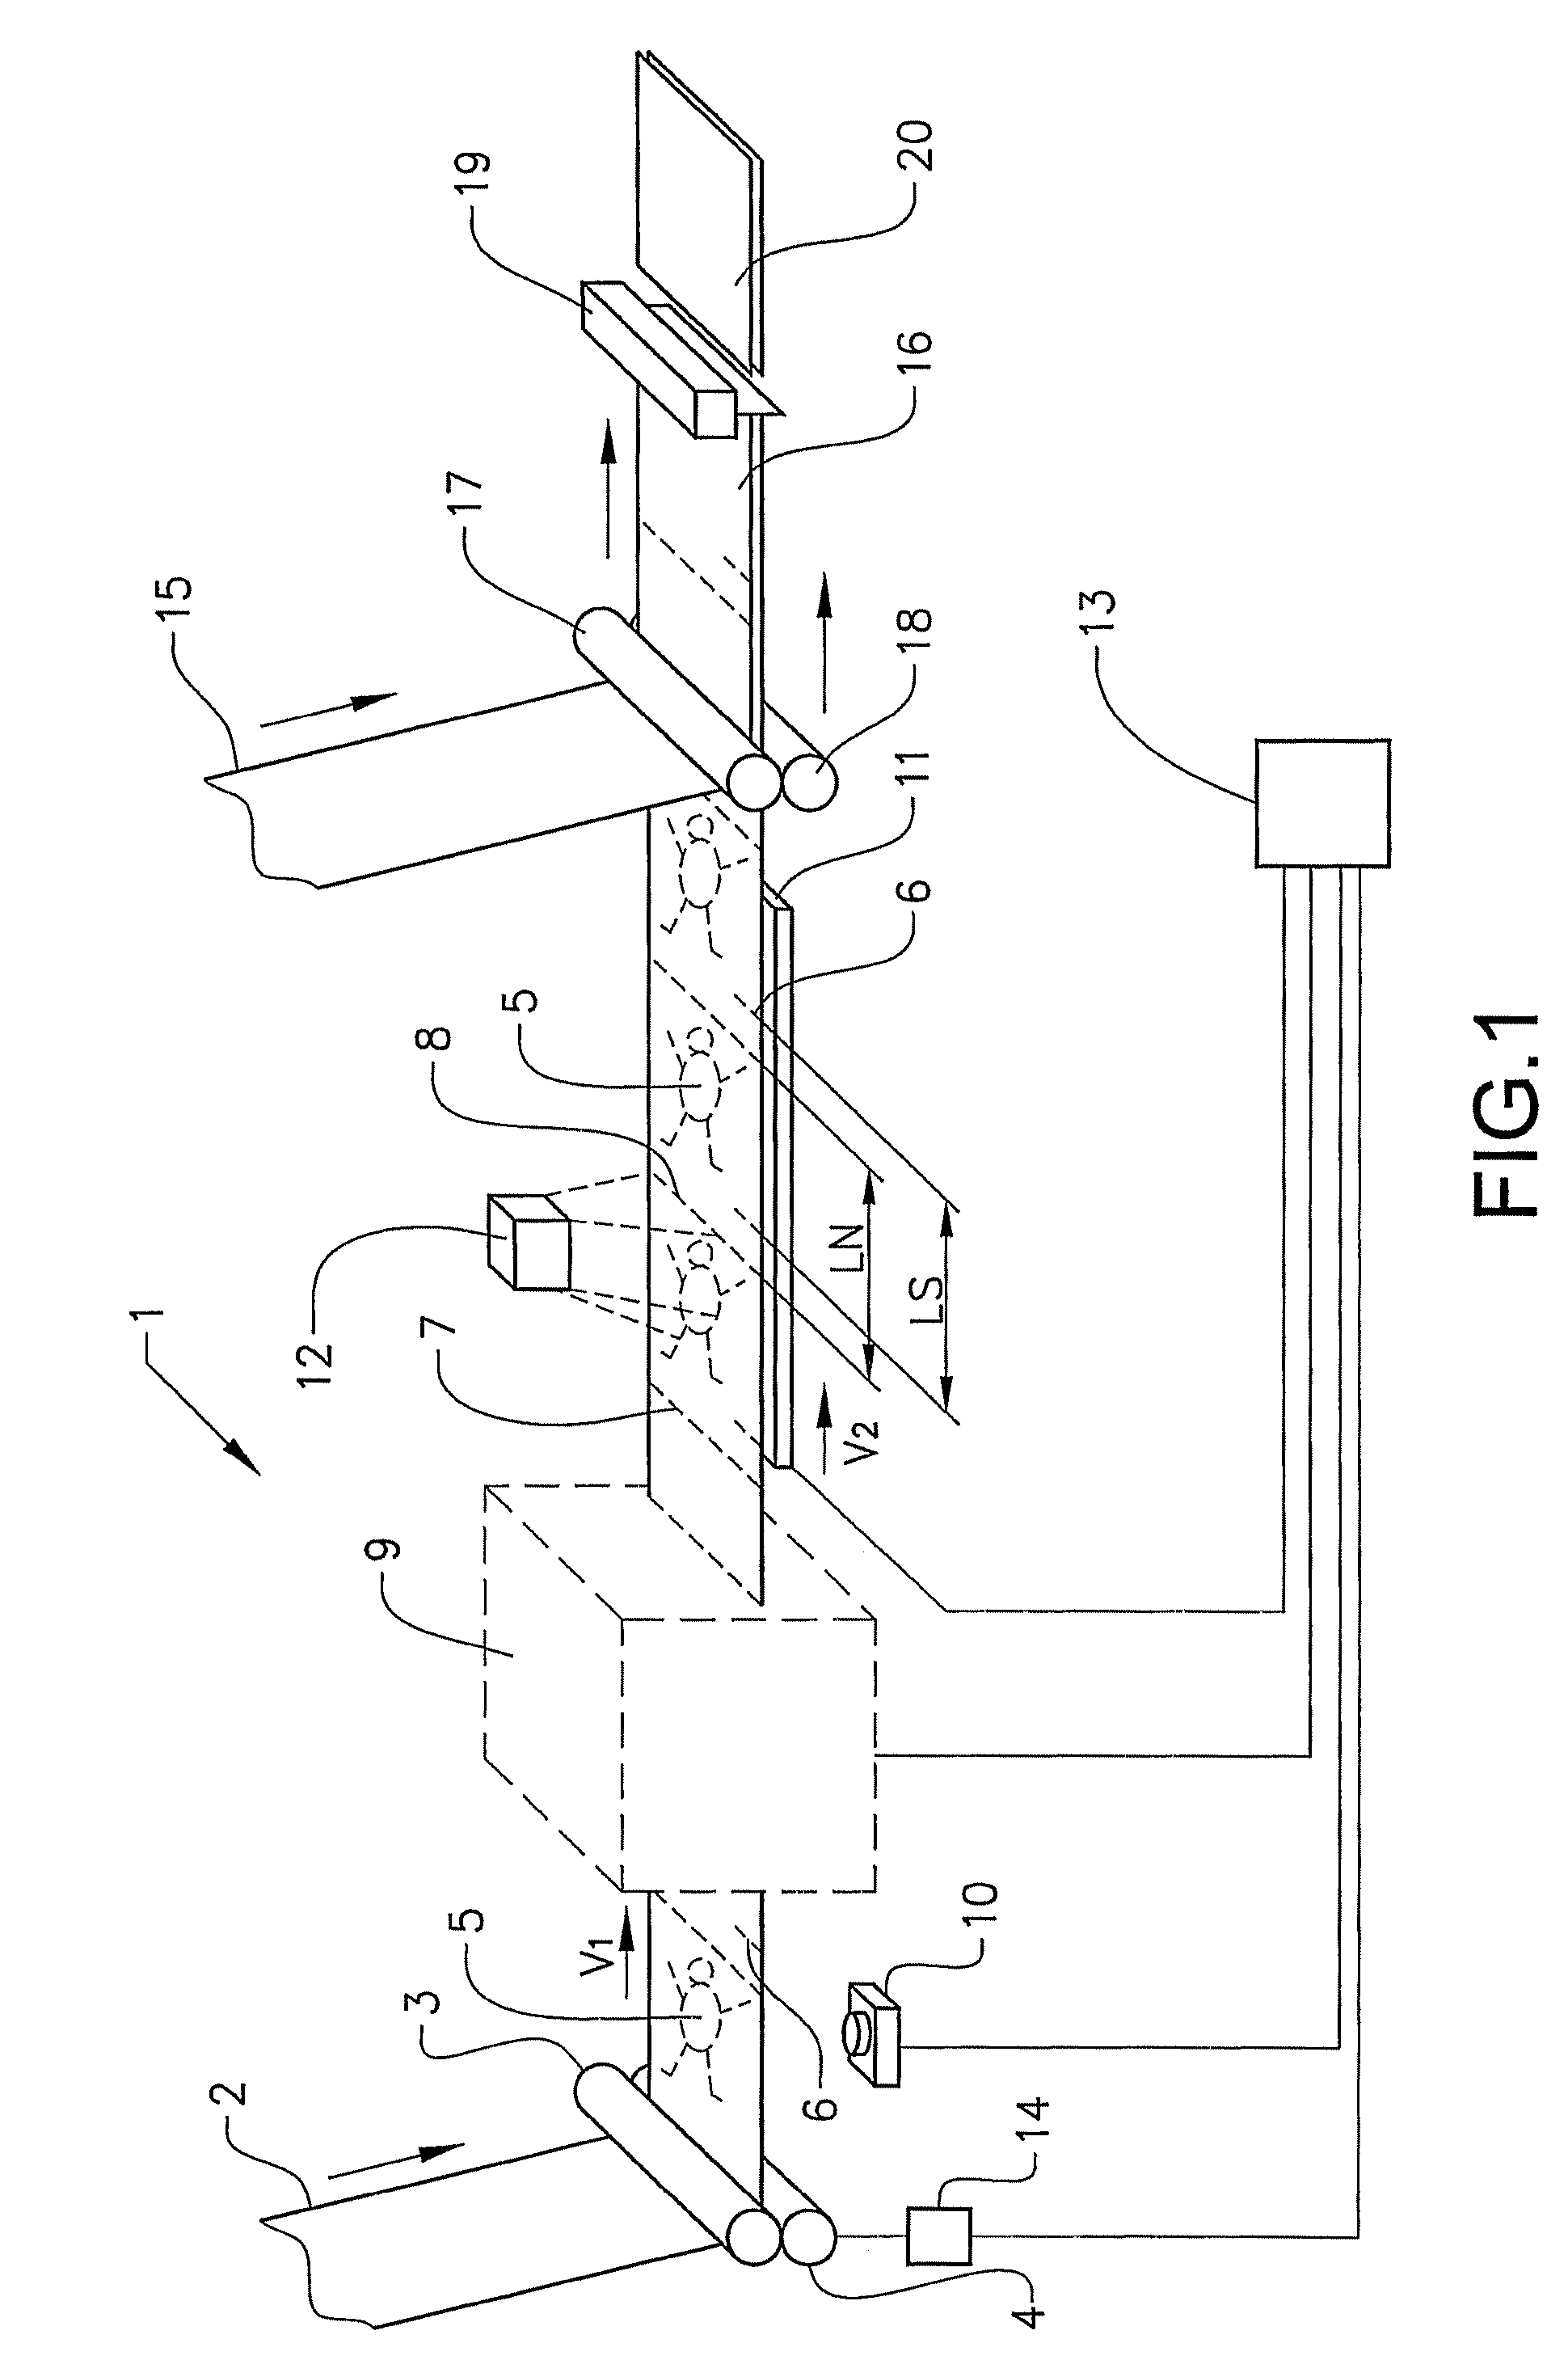 Method and arrangement for synchronized positioning of at least one essentially continuous material web based on a virtual master function